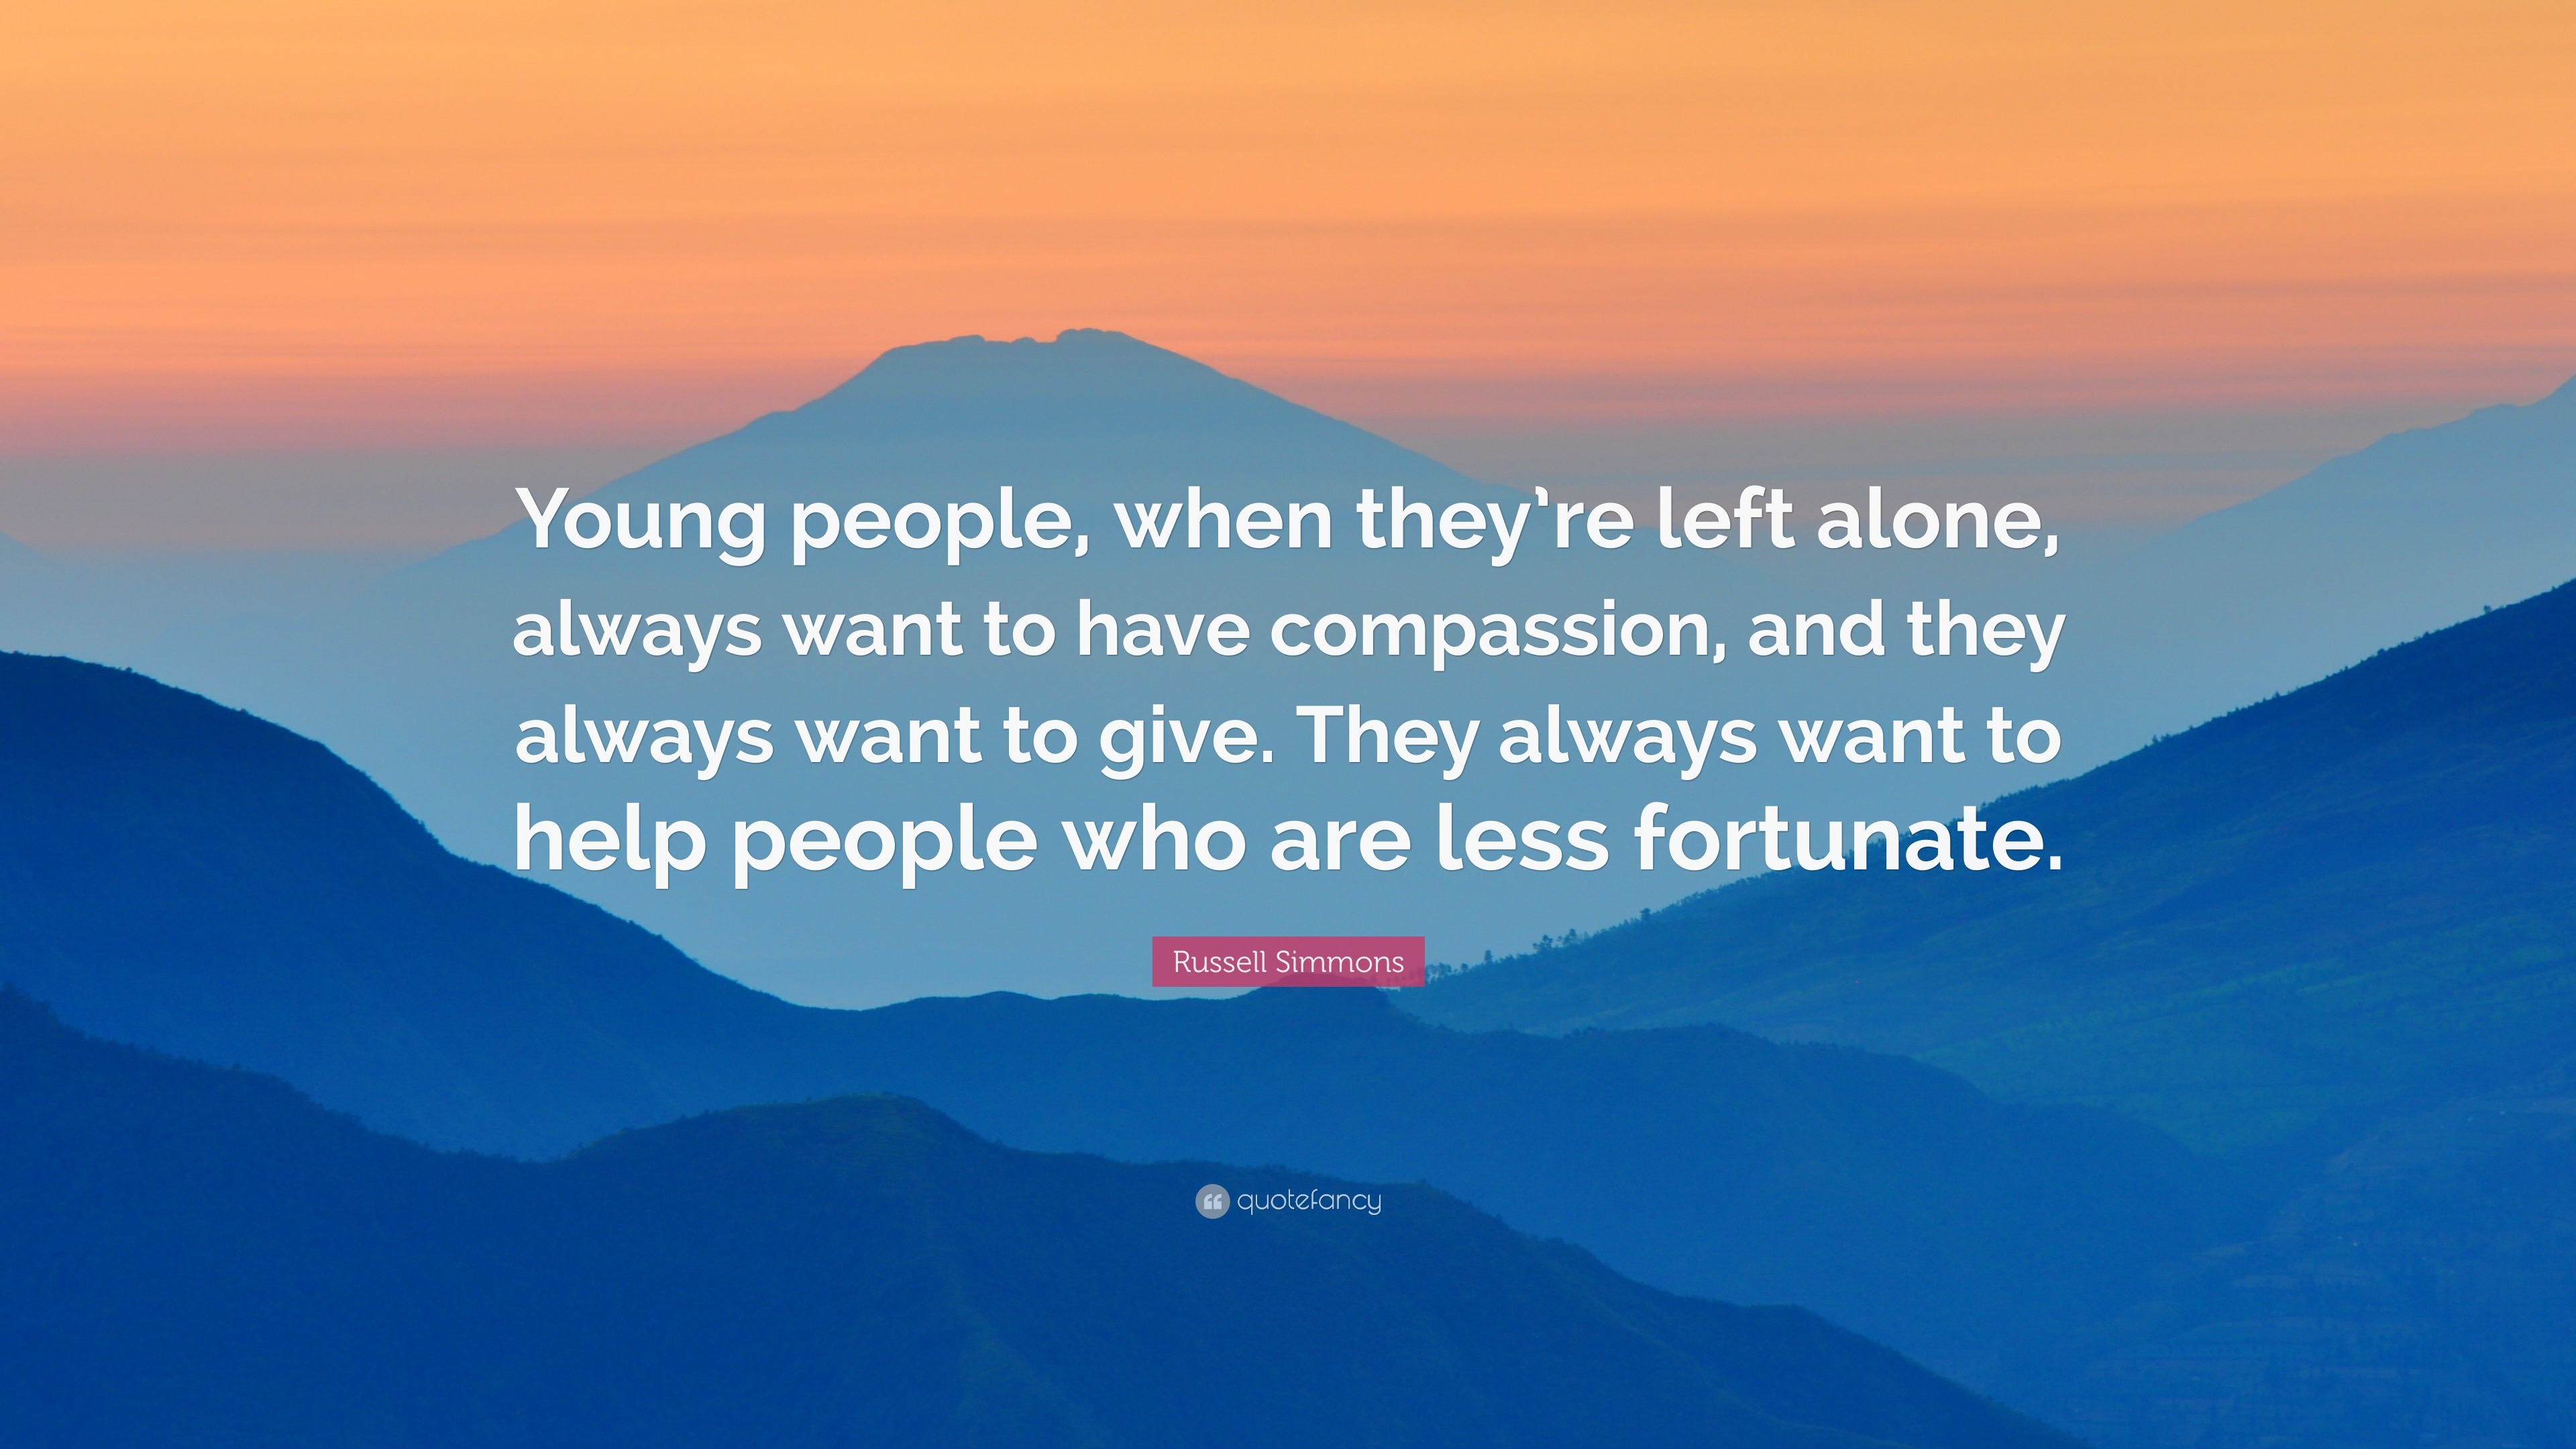 Russell Simmons Quote: "Young people, when they're left ...